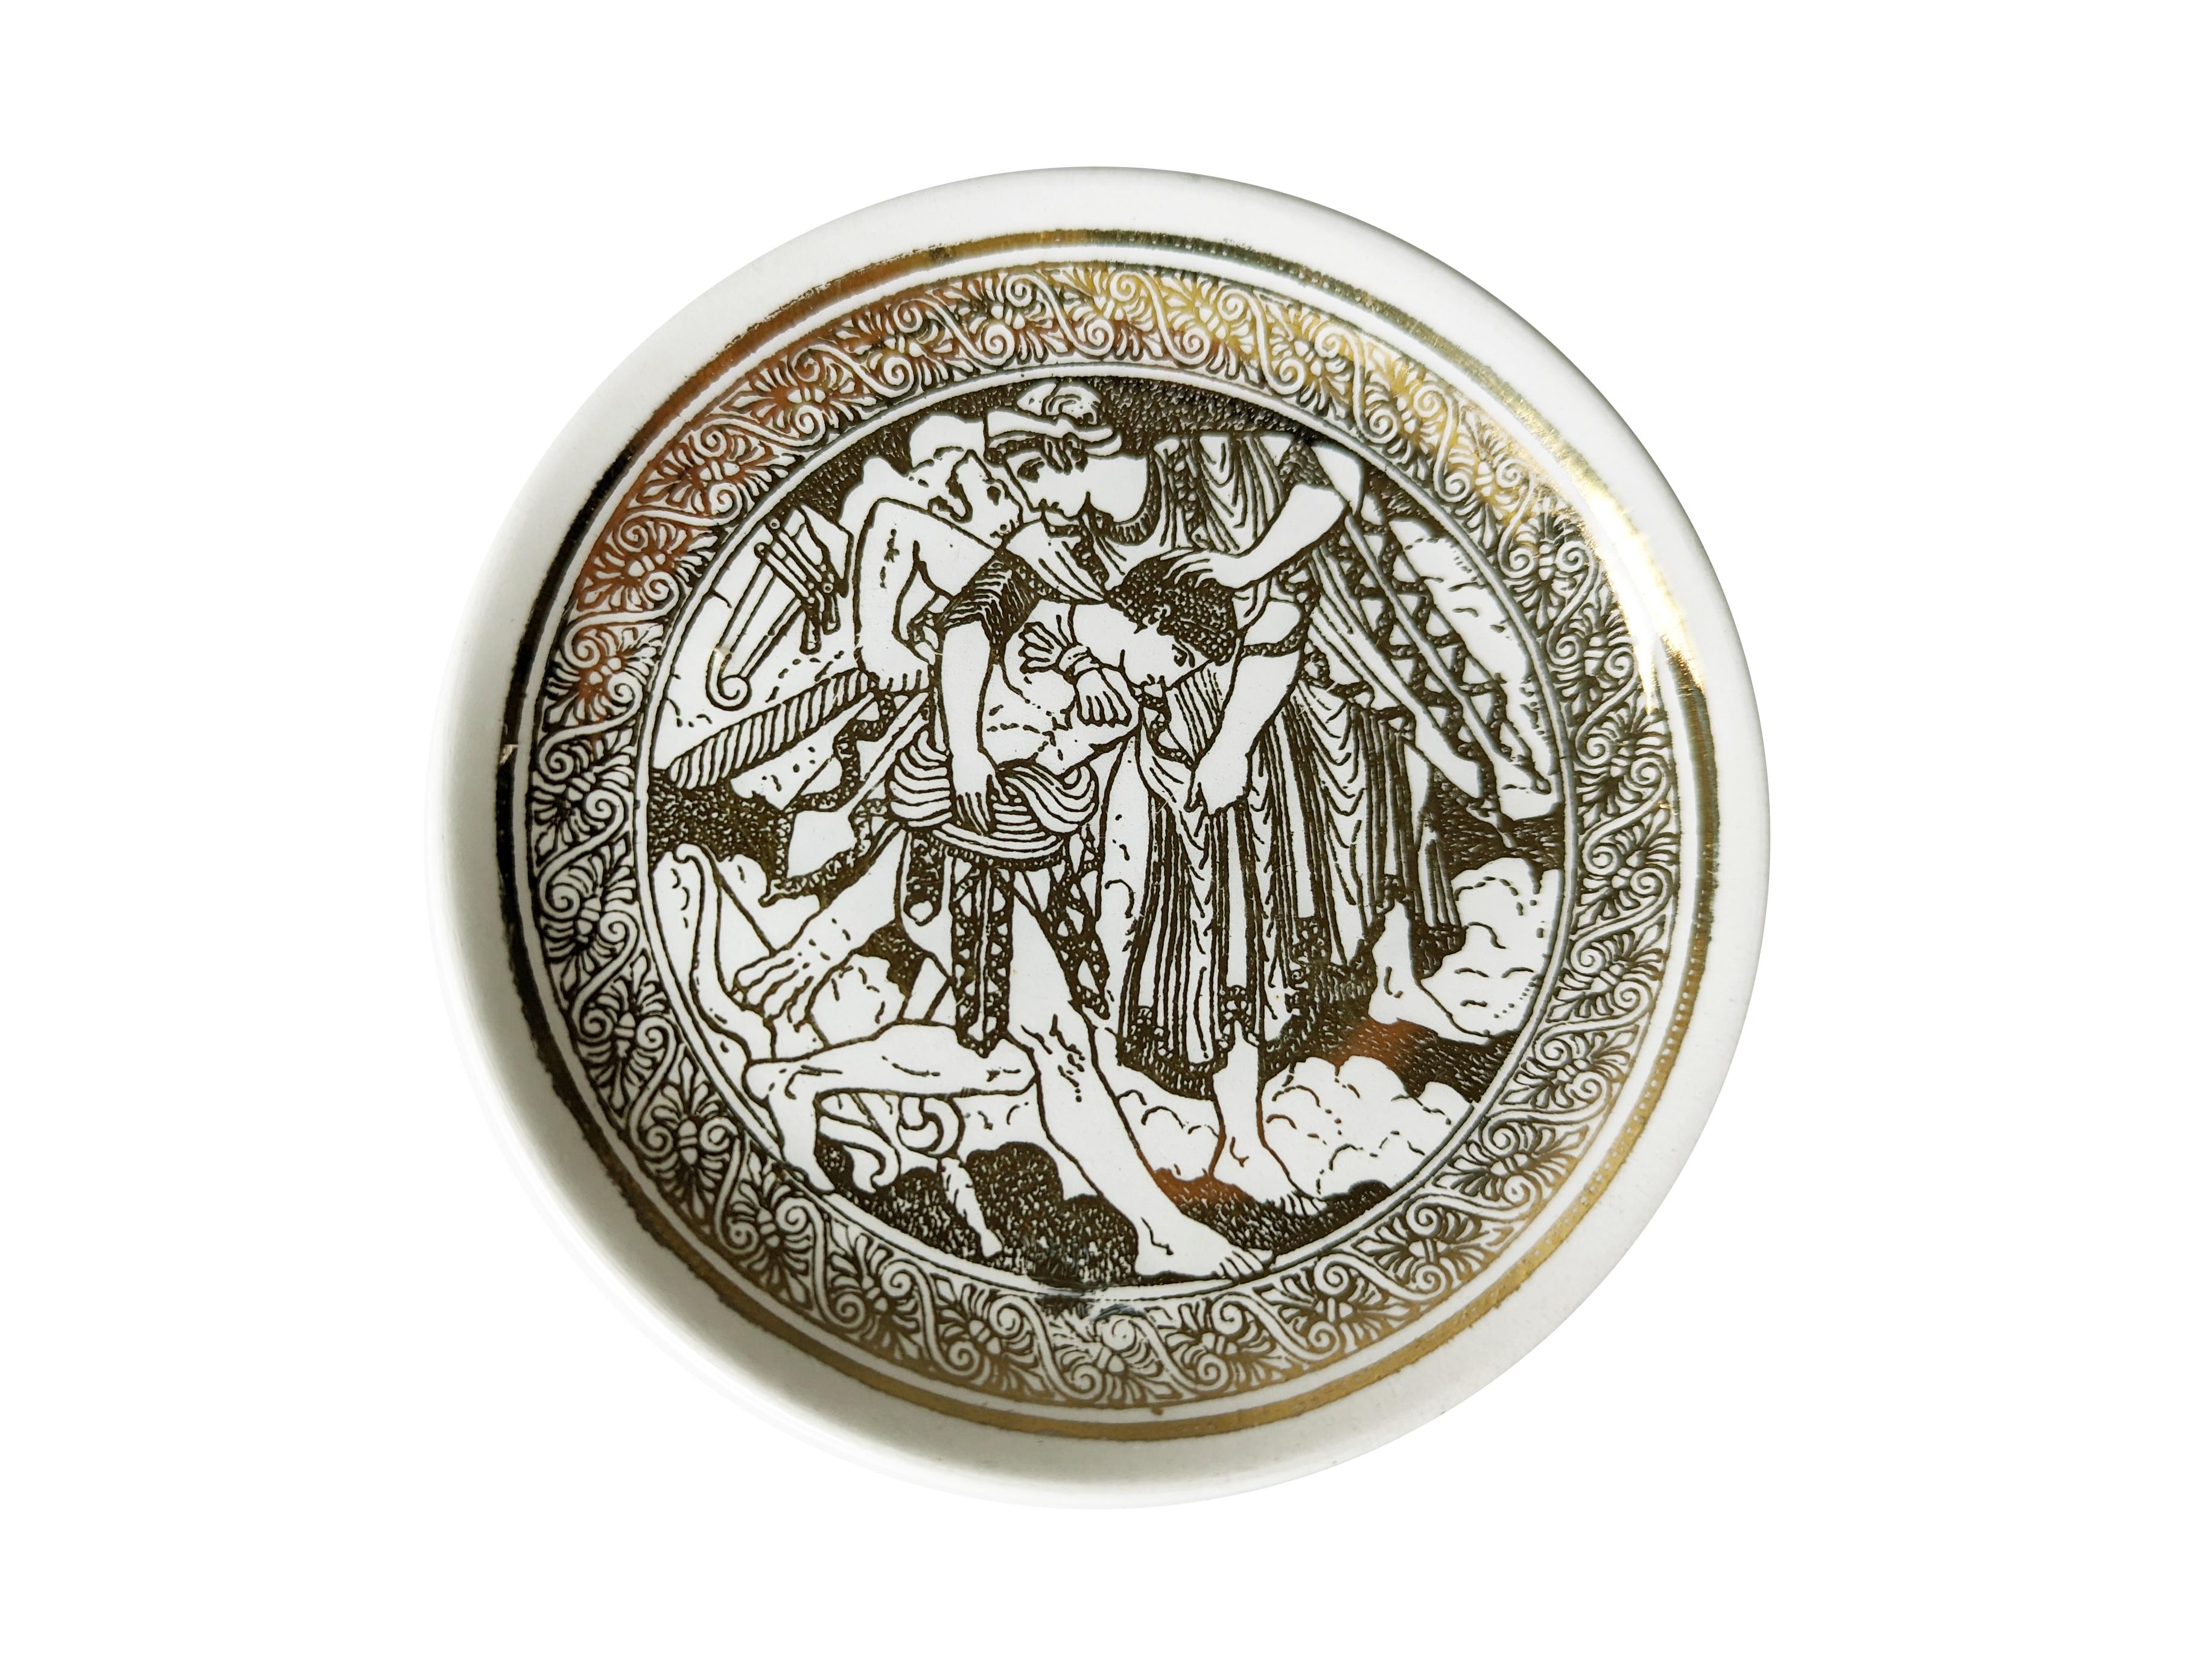 This Fornasetti Mitologia set includes four 4 inch (10.5 cm) coasters, . These are in very good condition considering their age, with slight fading of the gold and some very light scratches.
Each piece with gilt Greco Roman allegorical scene